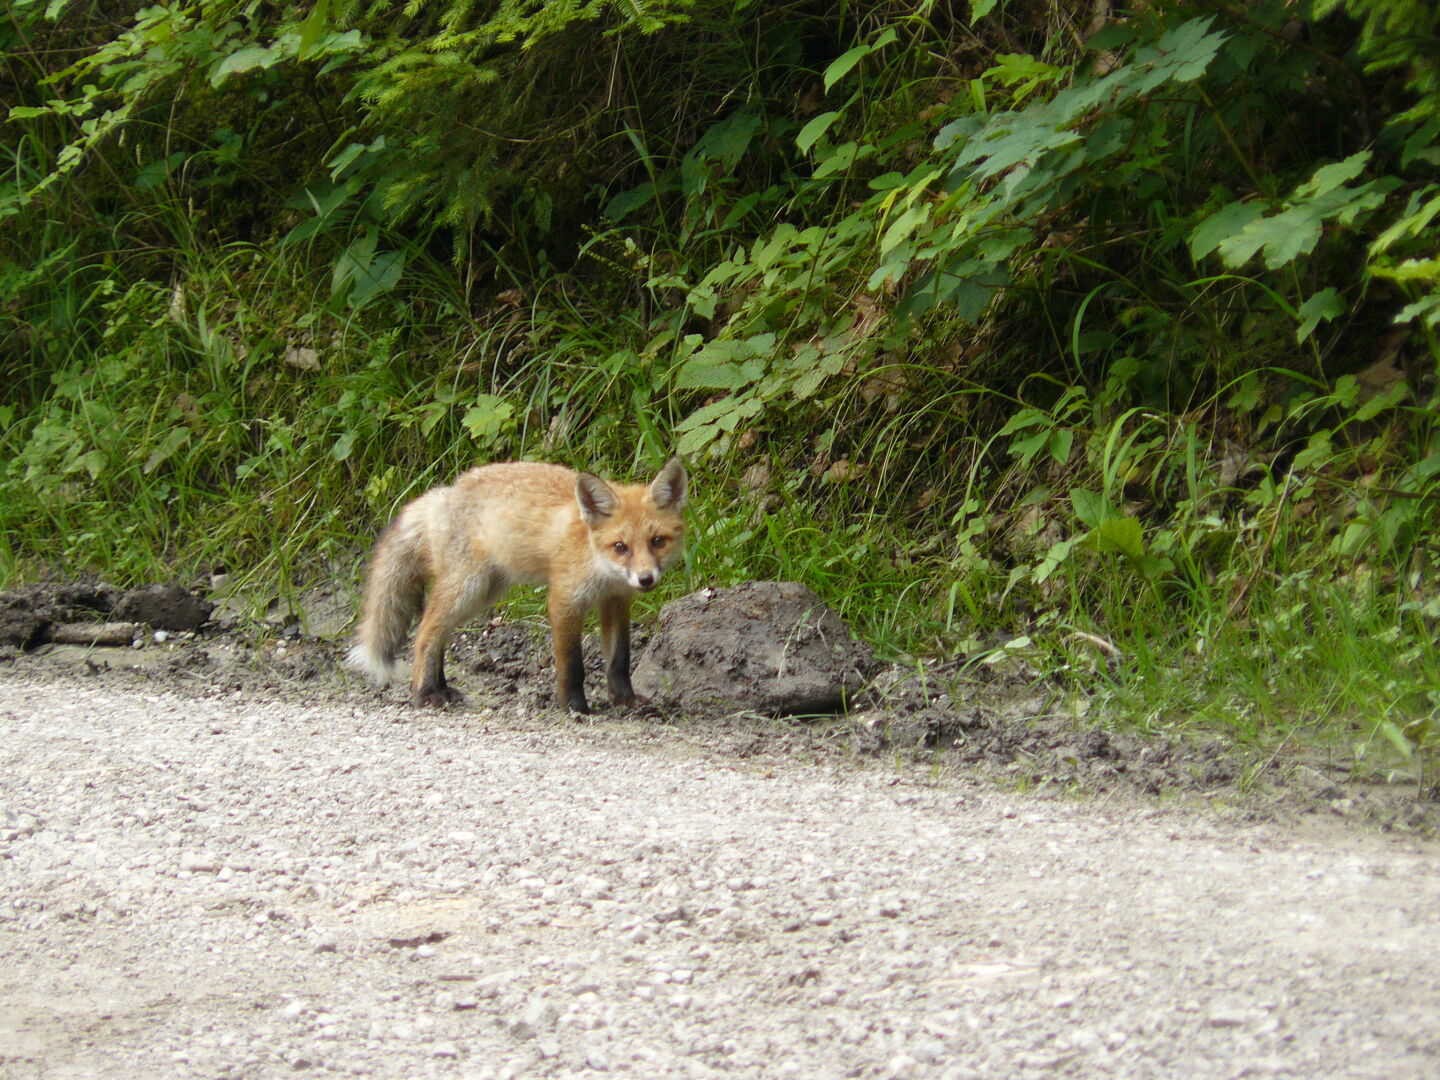 A small fox, a rare sight though they are said to be very common animals.